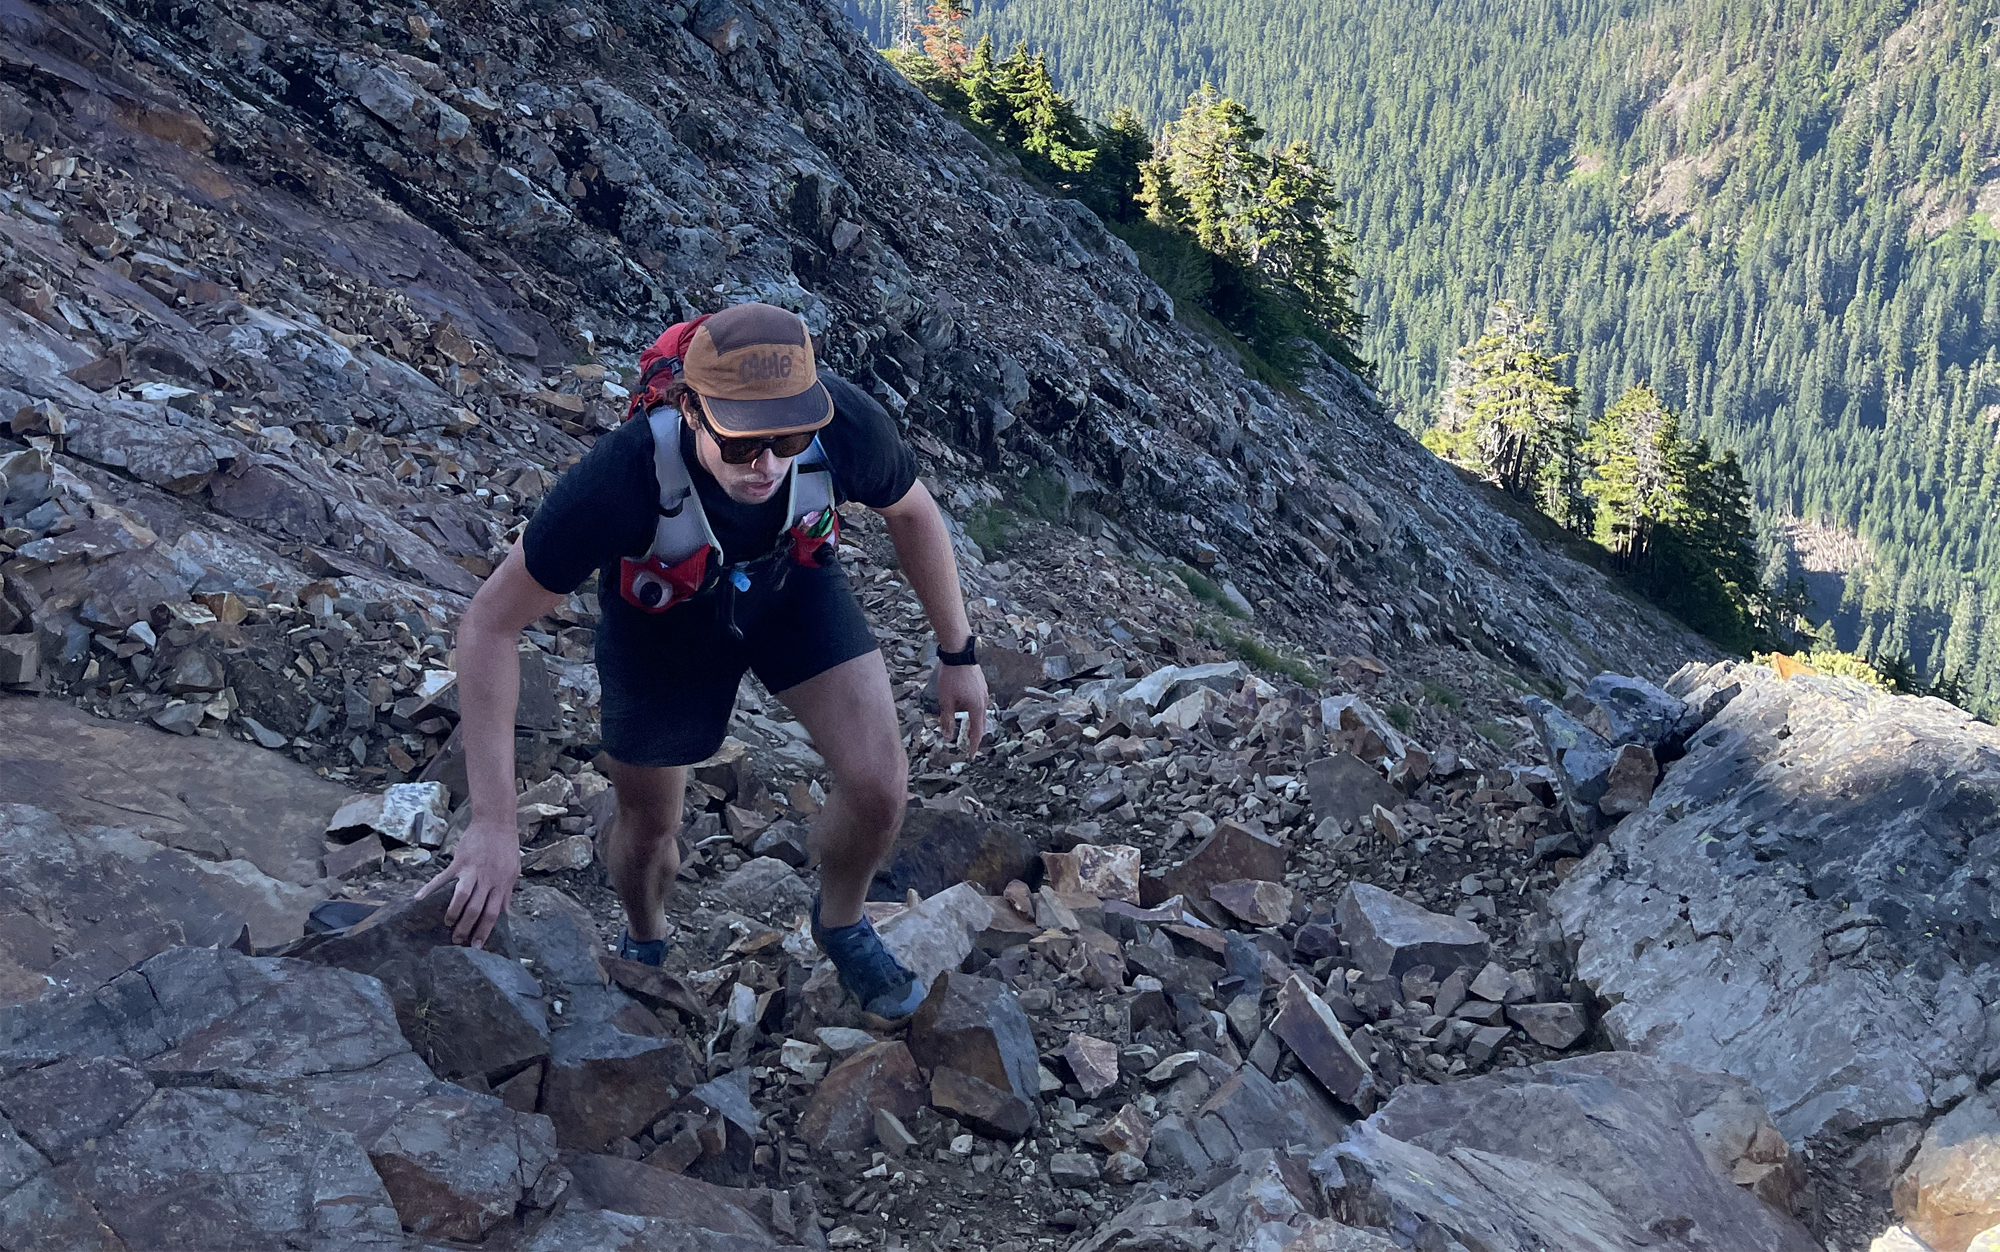 Trail runner heading up a mountain